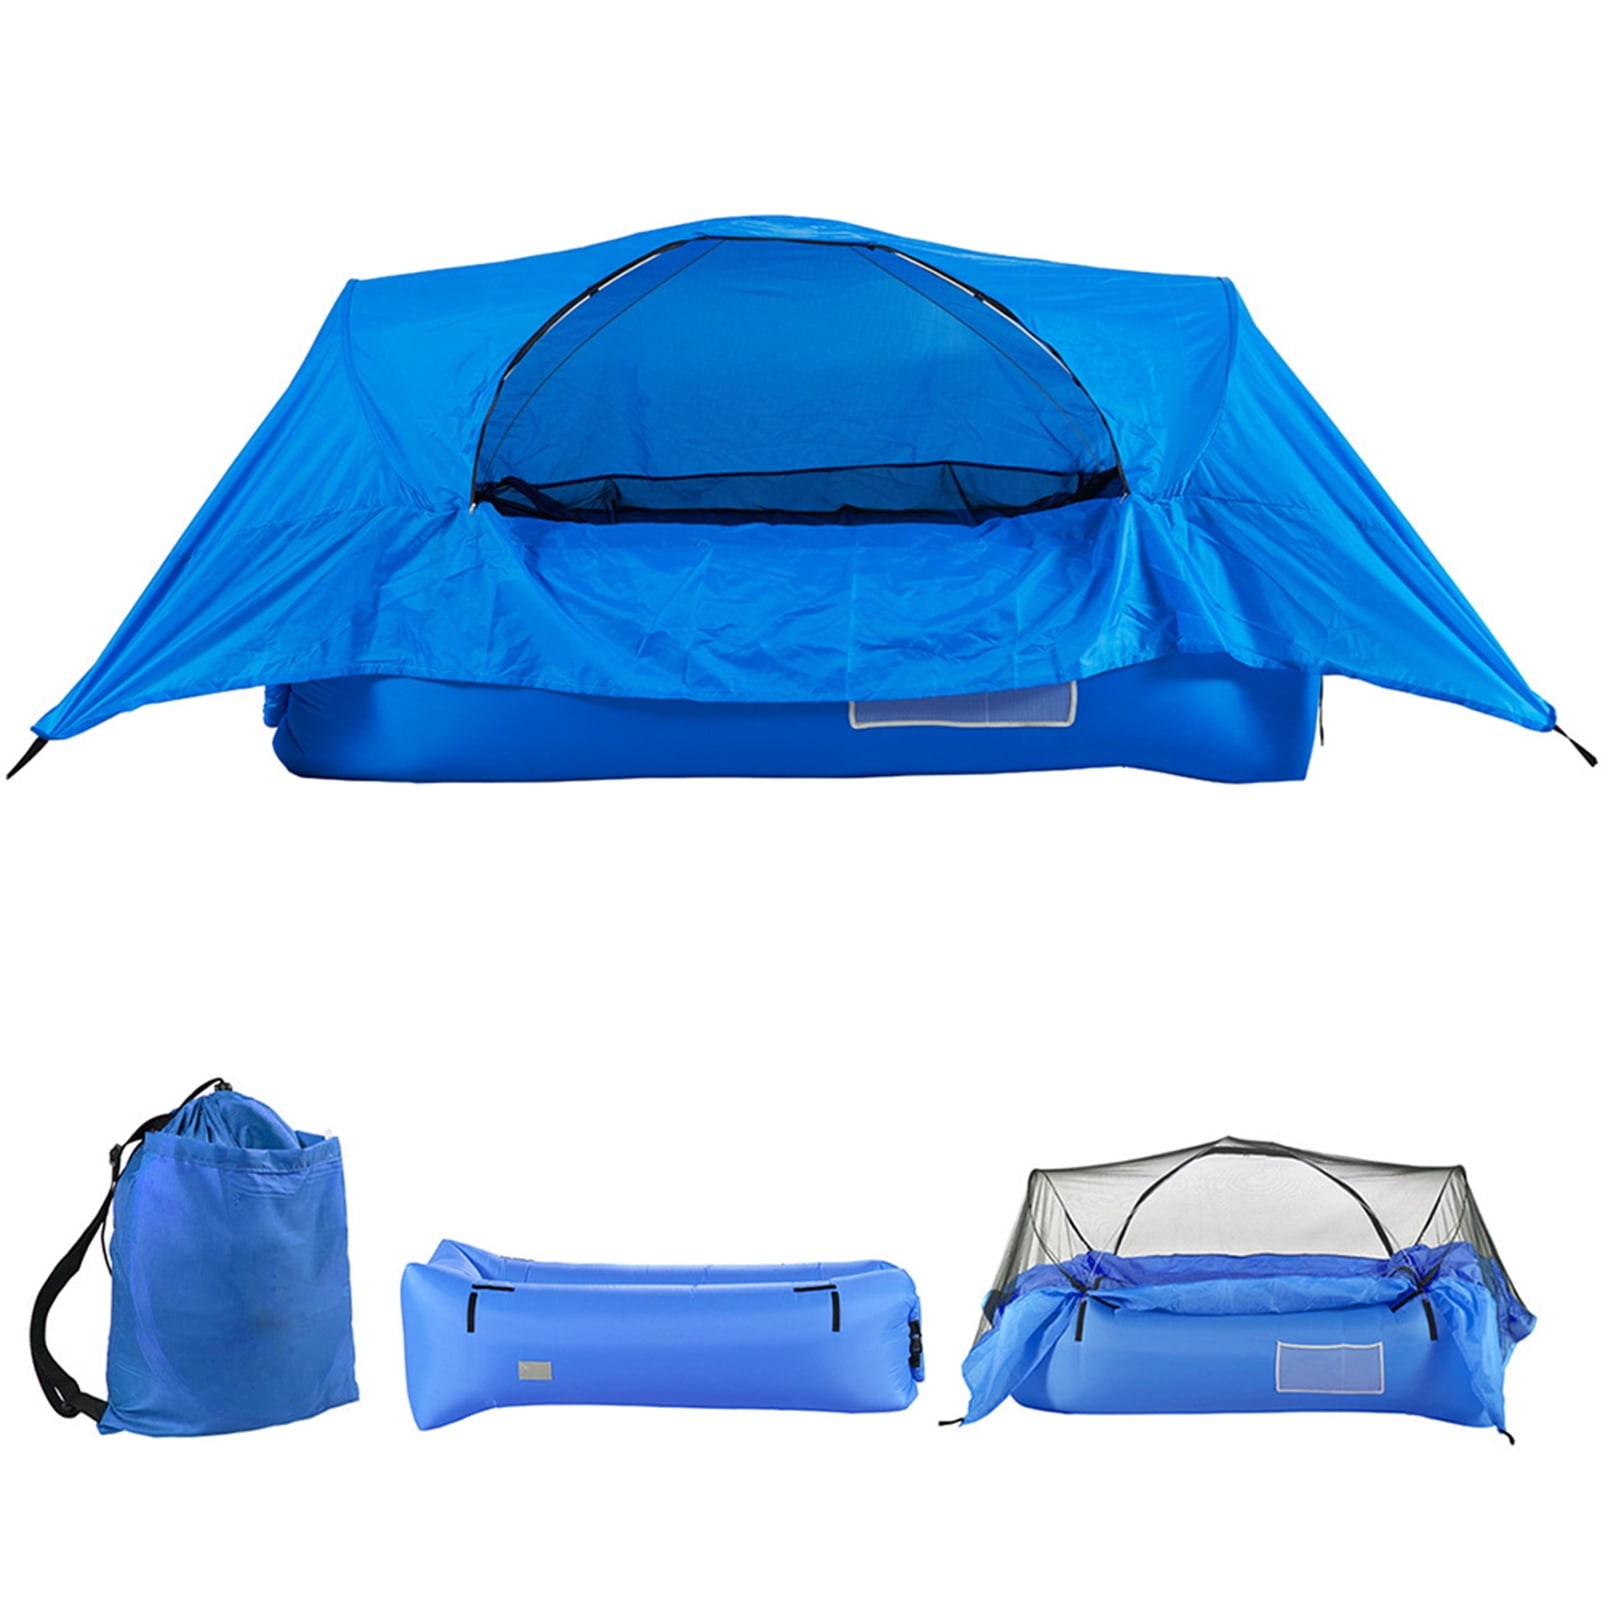 Double Action Air Pump Tent Bed Outdoor Use Durable Multi Use Inflate Deflate UK 